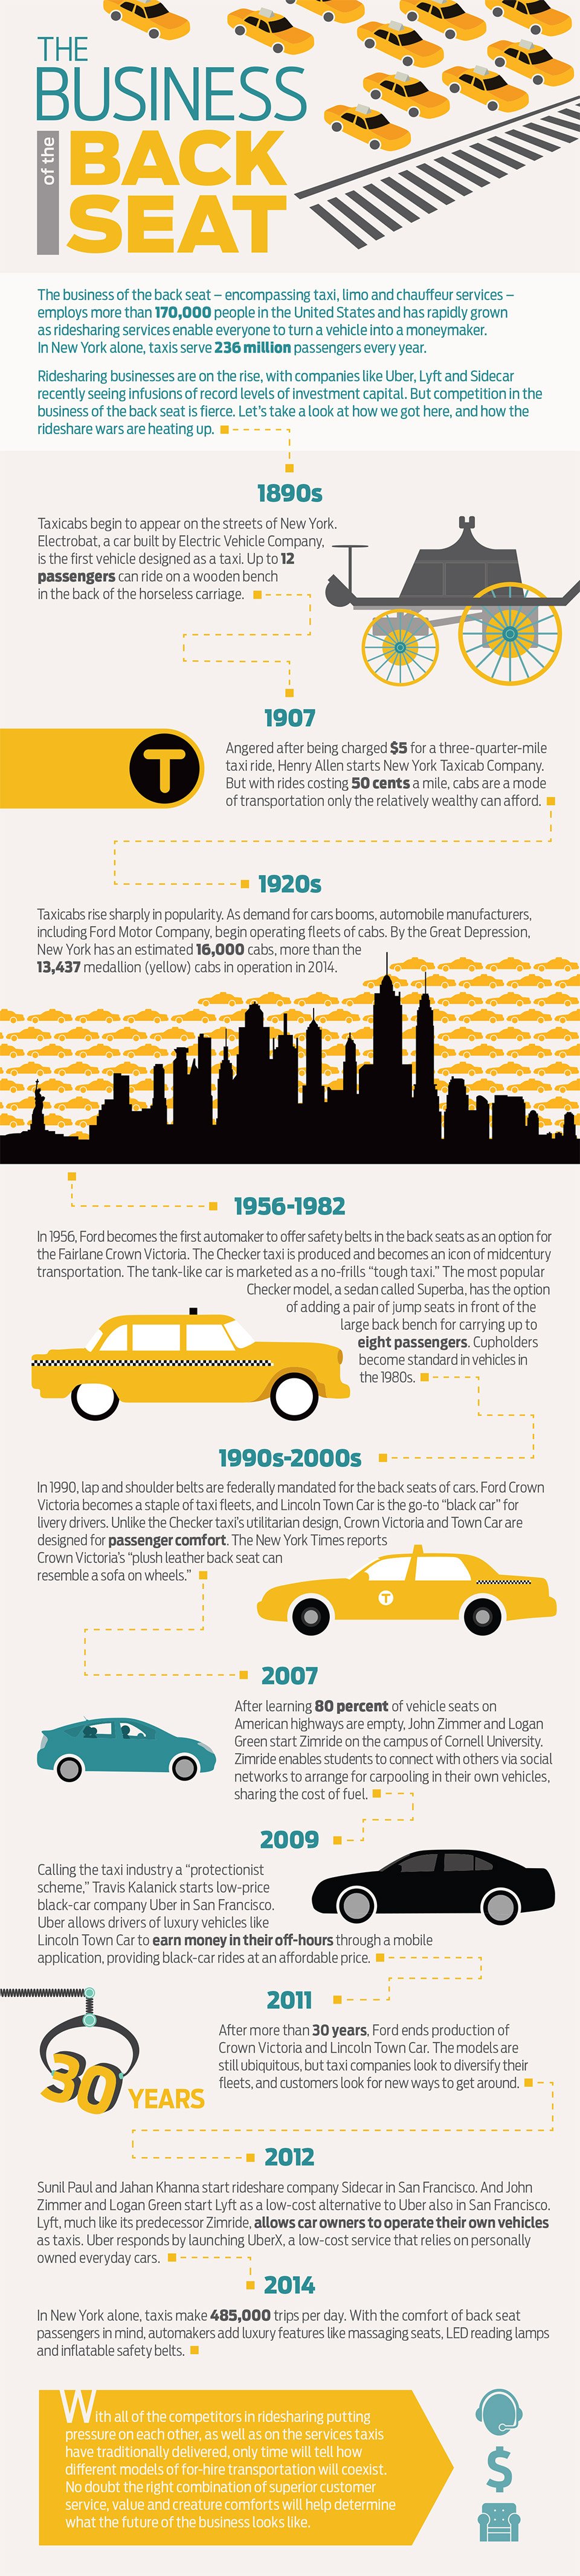 Infographic: The Business of the Back Seat